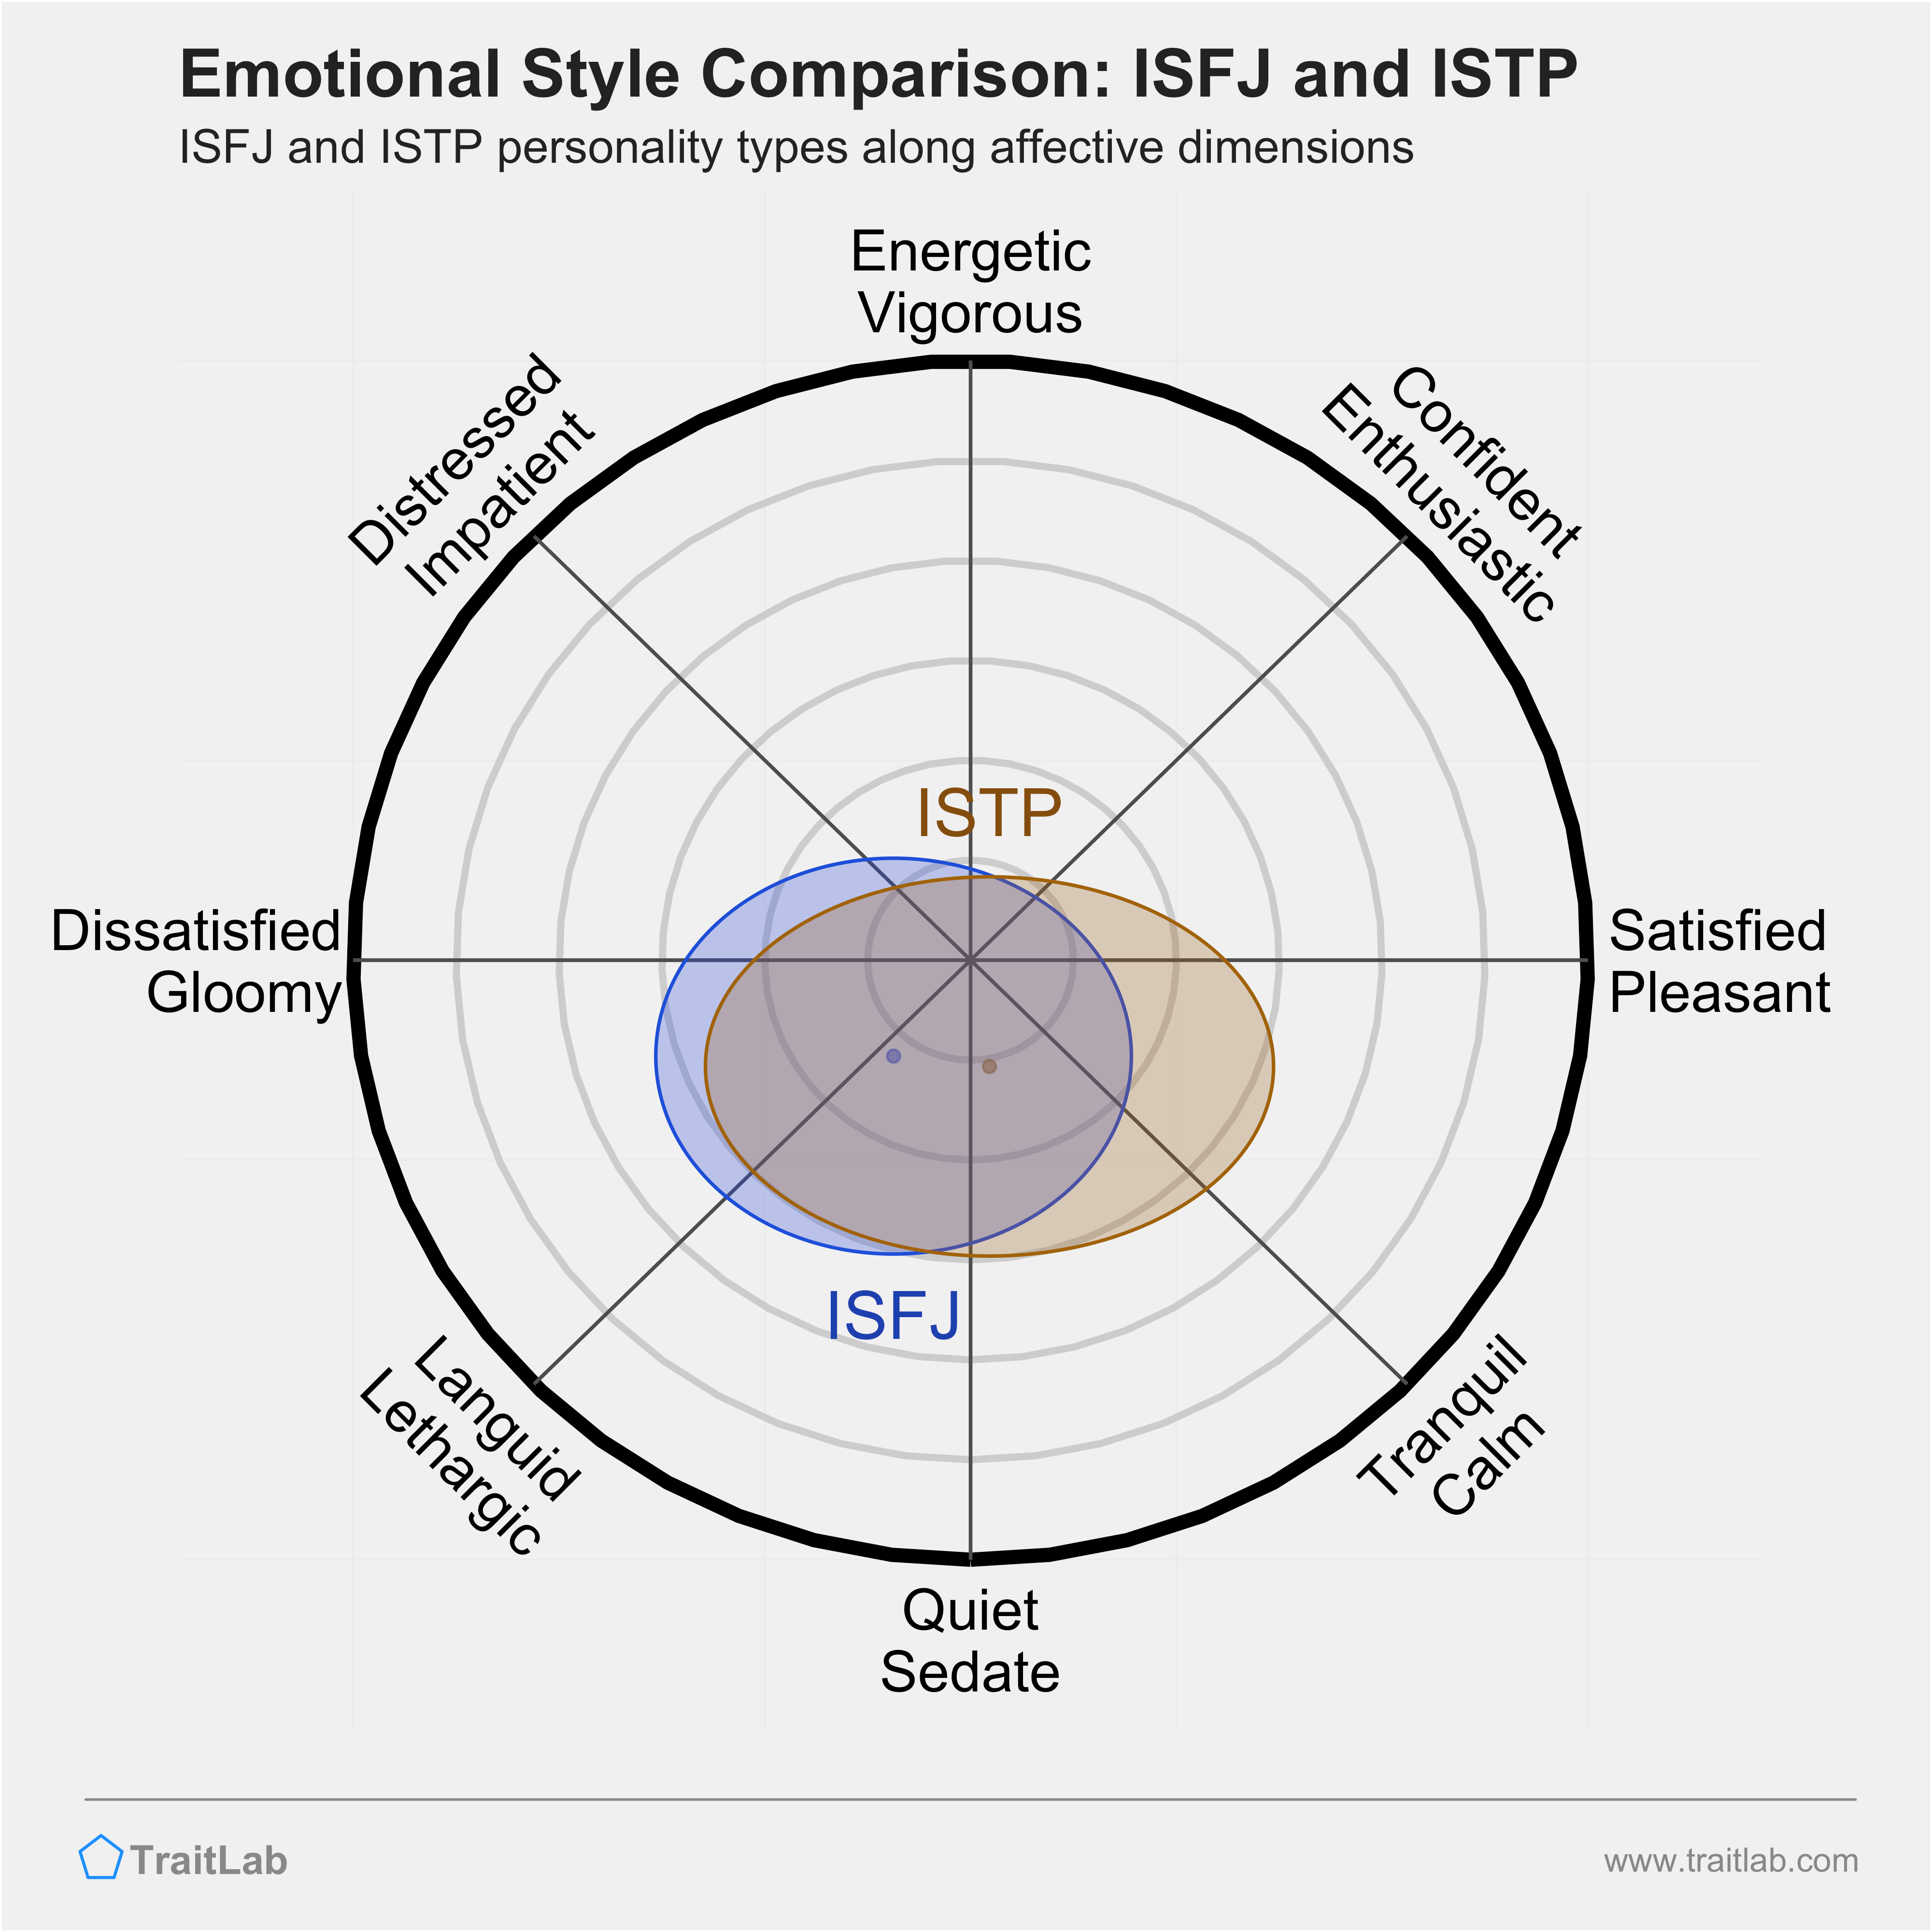 ISFJ and ISTP comparison across emotional (affective) dimensions